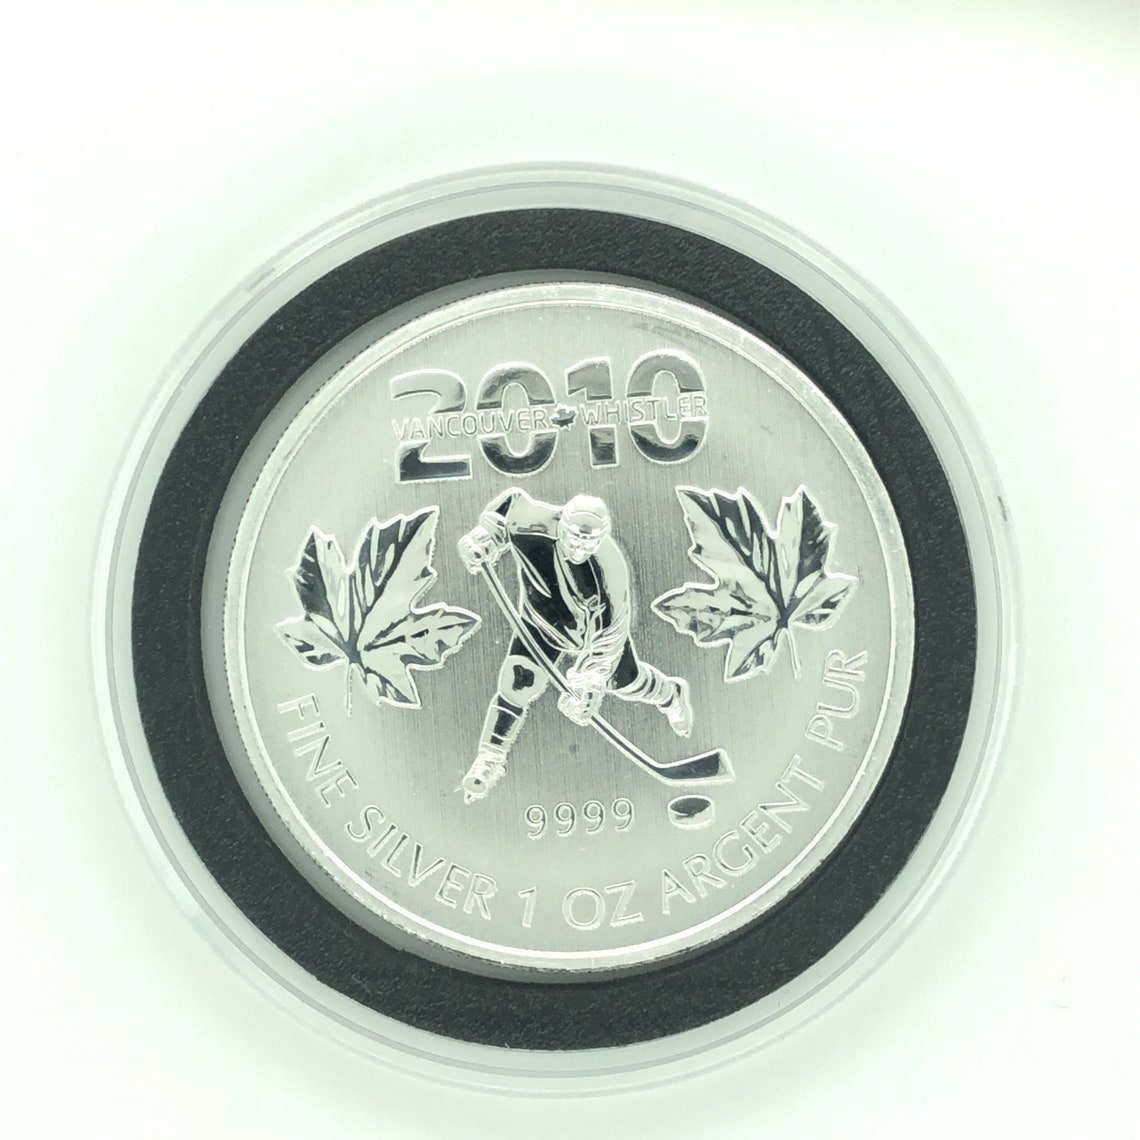 2010 Vancouver Olympic Games Silver Coin 9999 Etsy